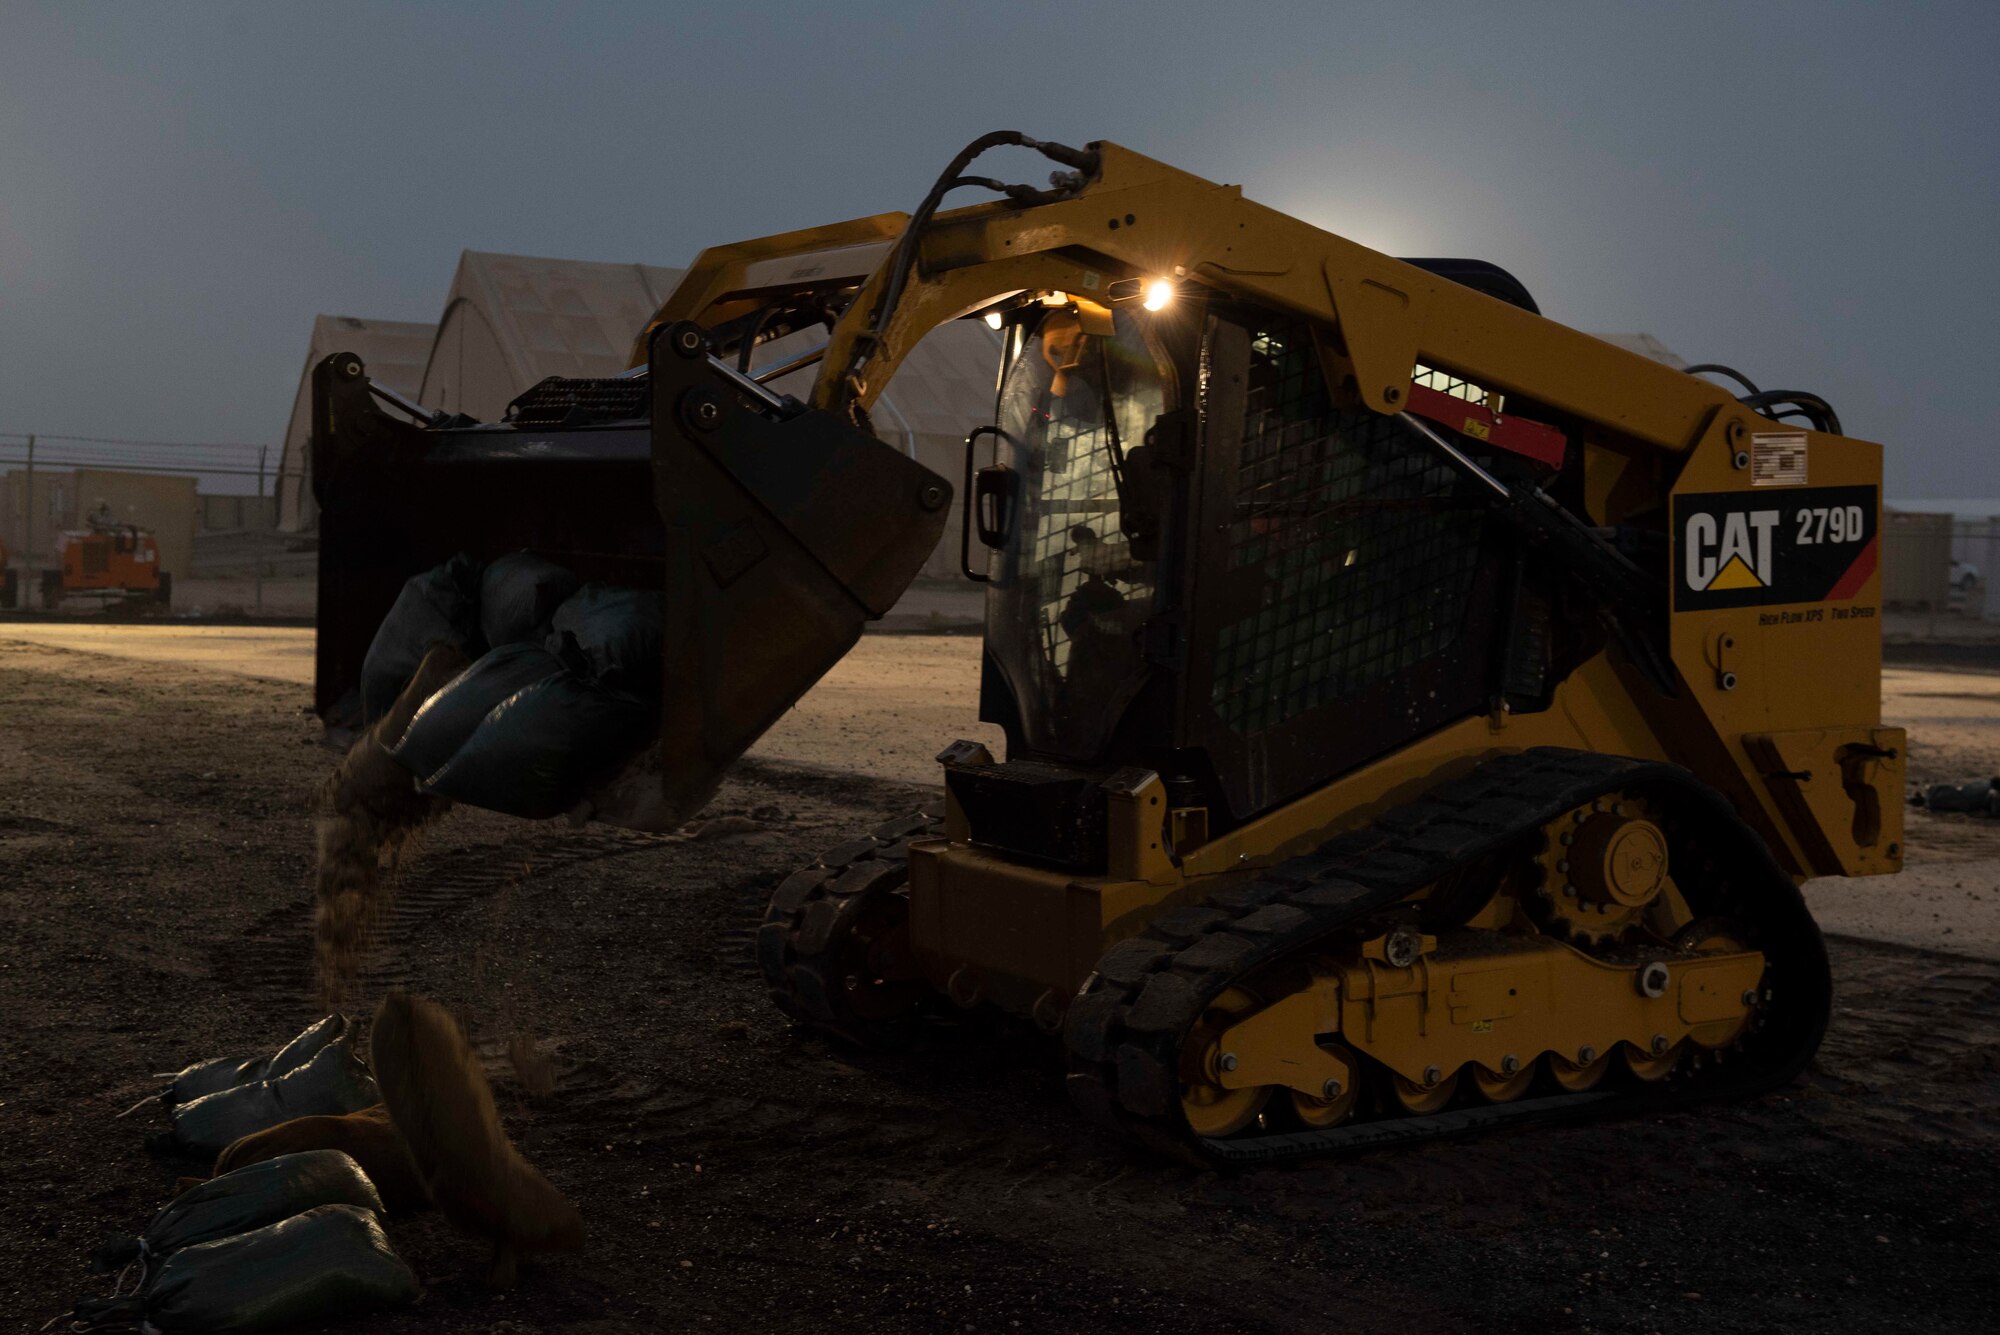 A U.S. Air Force Airman from the 386th Expeditionary Civil Engineer Squadron removes debris with a compact track loader during a Rapid Airfield Damage Recovery training exercise at Ali Al Salem Air Base, Kuwait, Nov. 16, 2020. The intent of RADR training is for Airmen from different ECES shops to work together simultaneously to expeditiously repair a damaged runway. (U.S. Air Force photo by Staff Sgt. Kenneth Boyton)